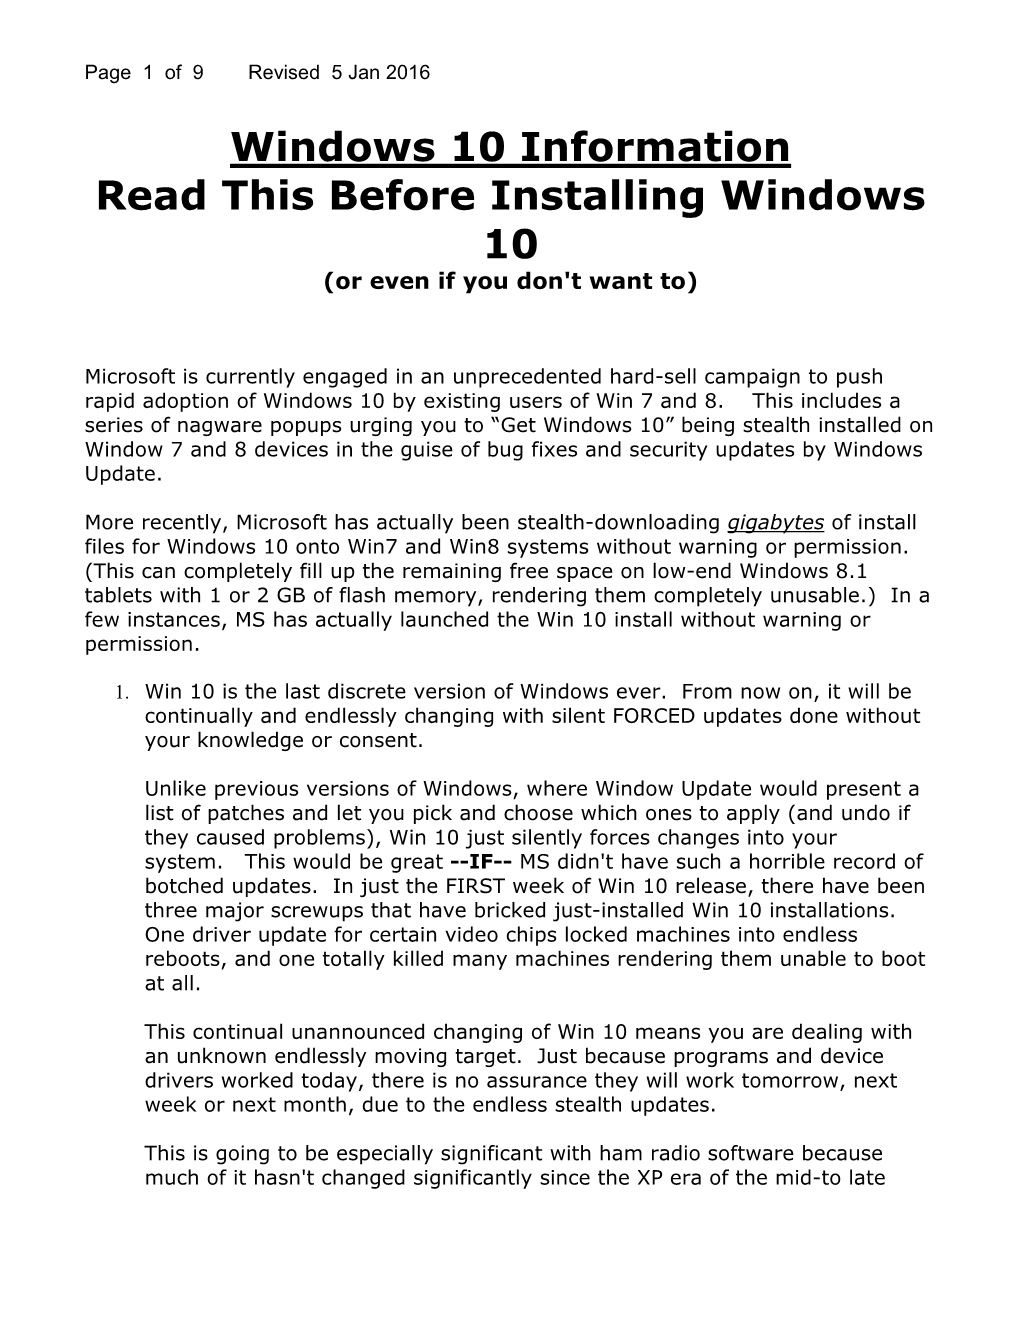 Windows 10 Information Read This Before Installing Windows 10 (Or Even If You Don't Want To)